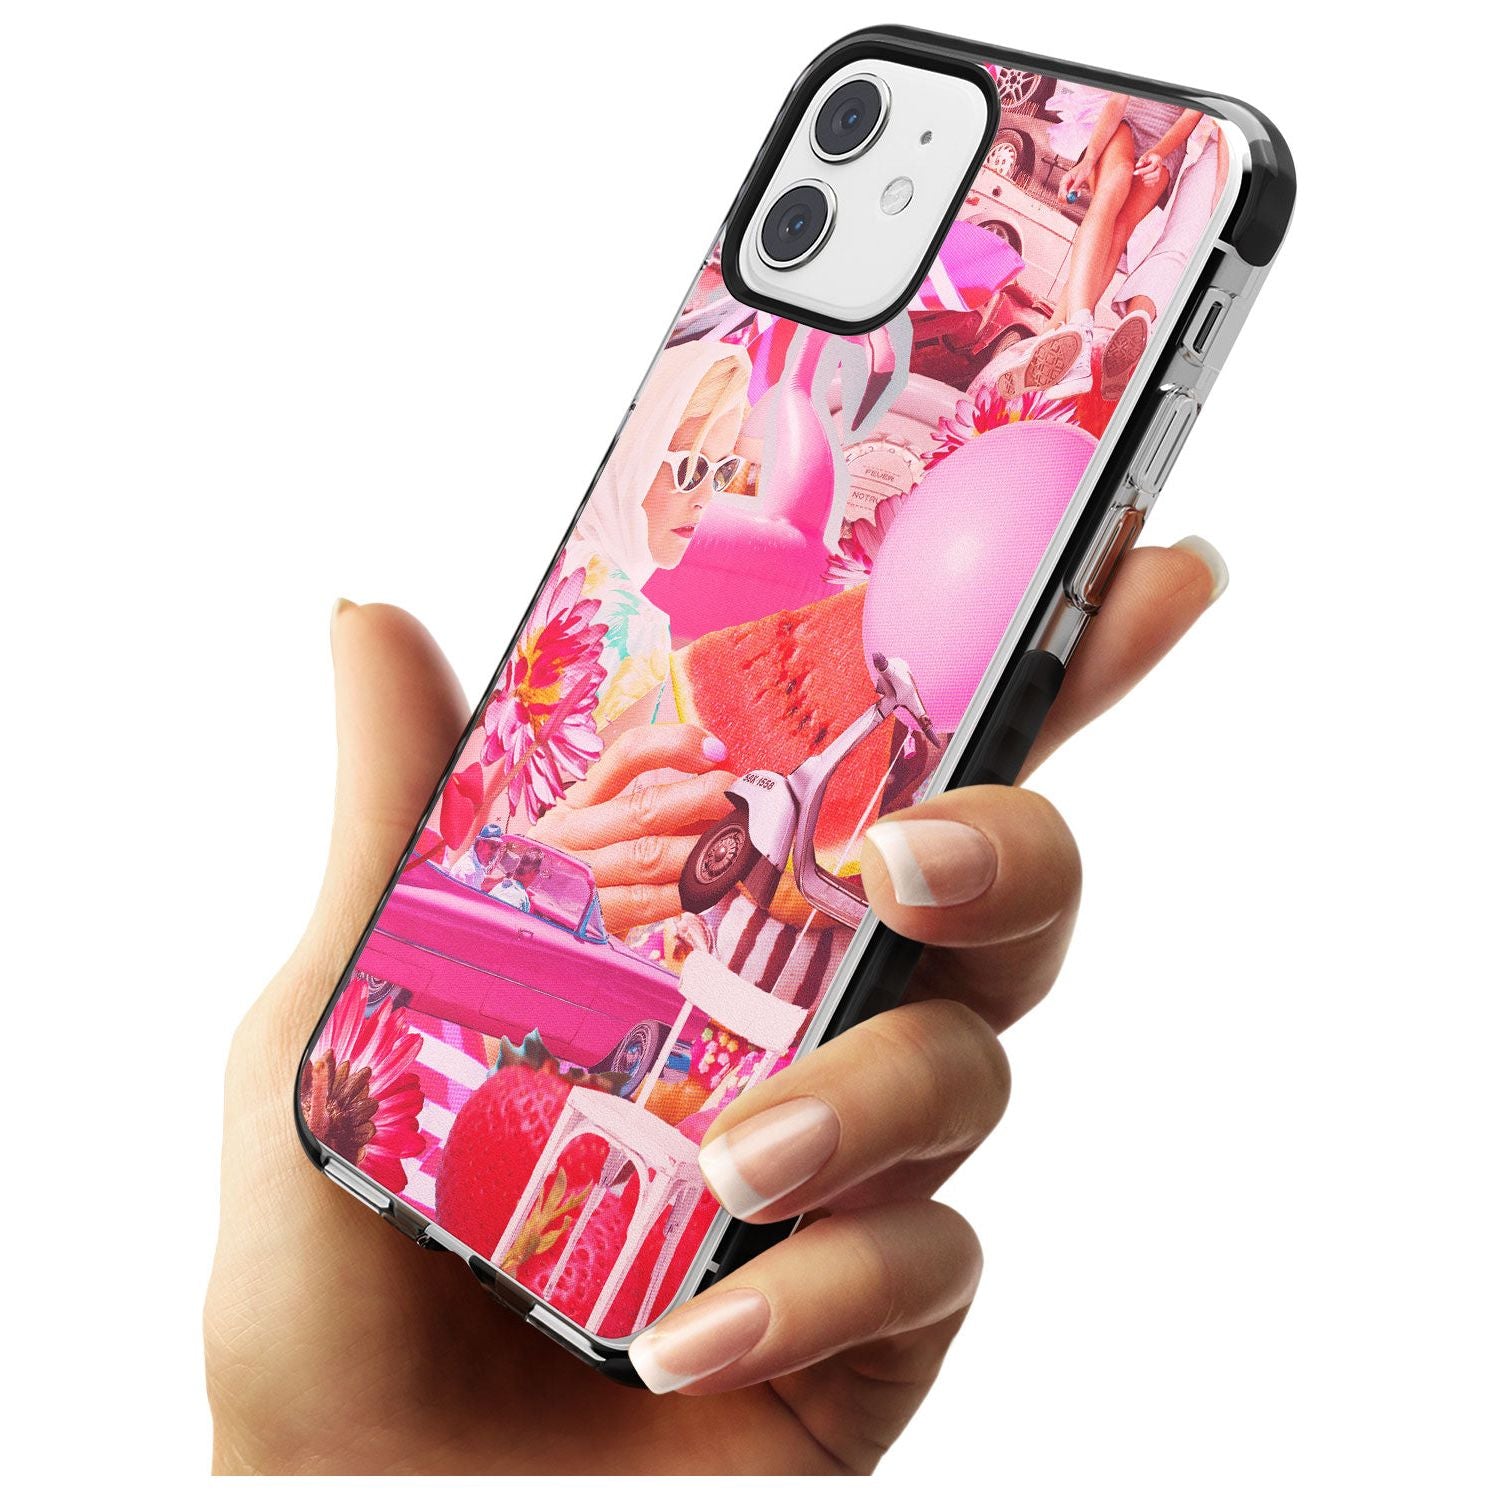 Vintage Collage: Pink Glamour Black Impact Phone Case for iPhone 11